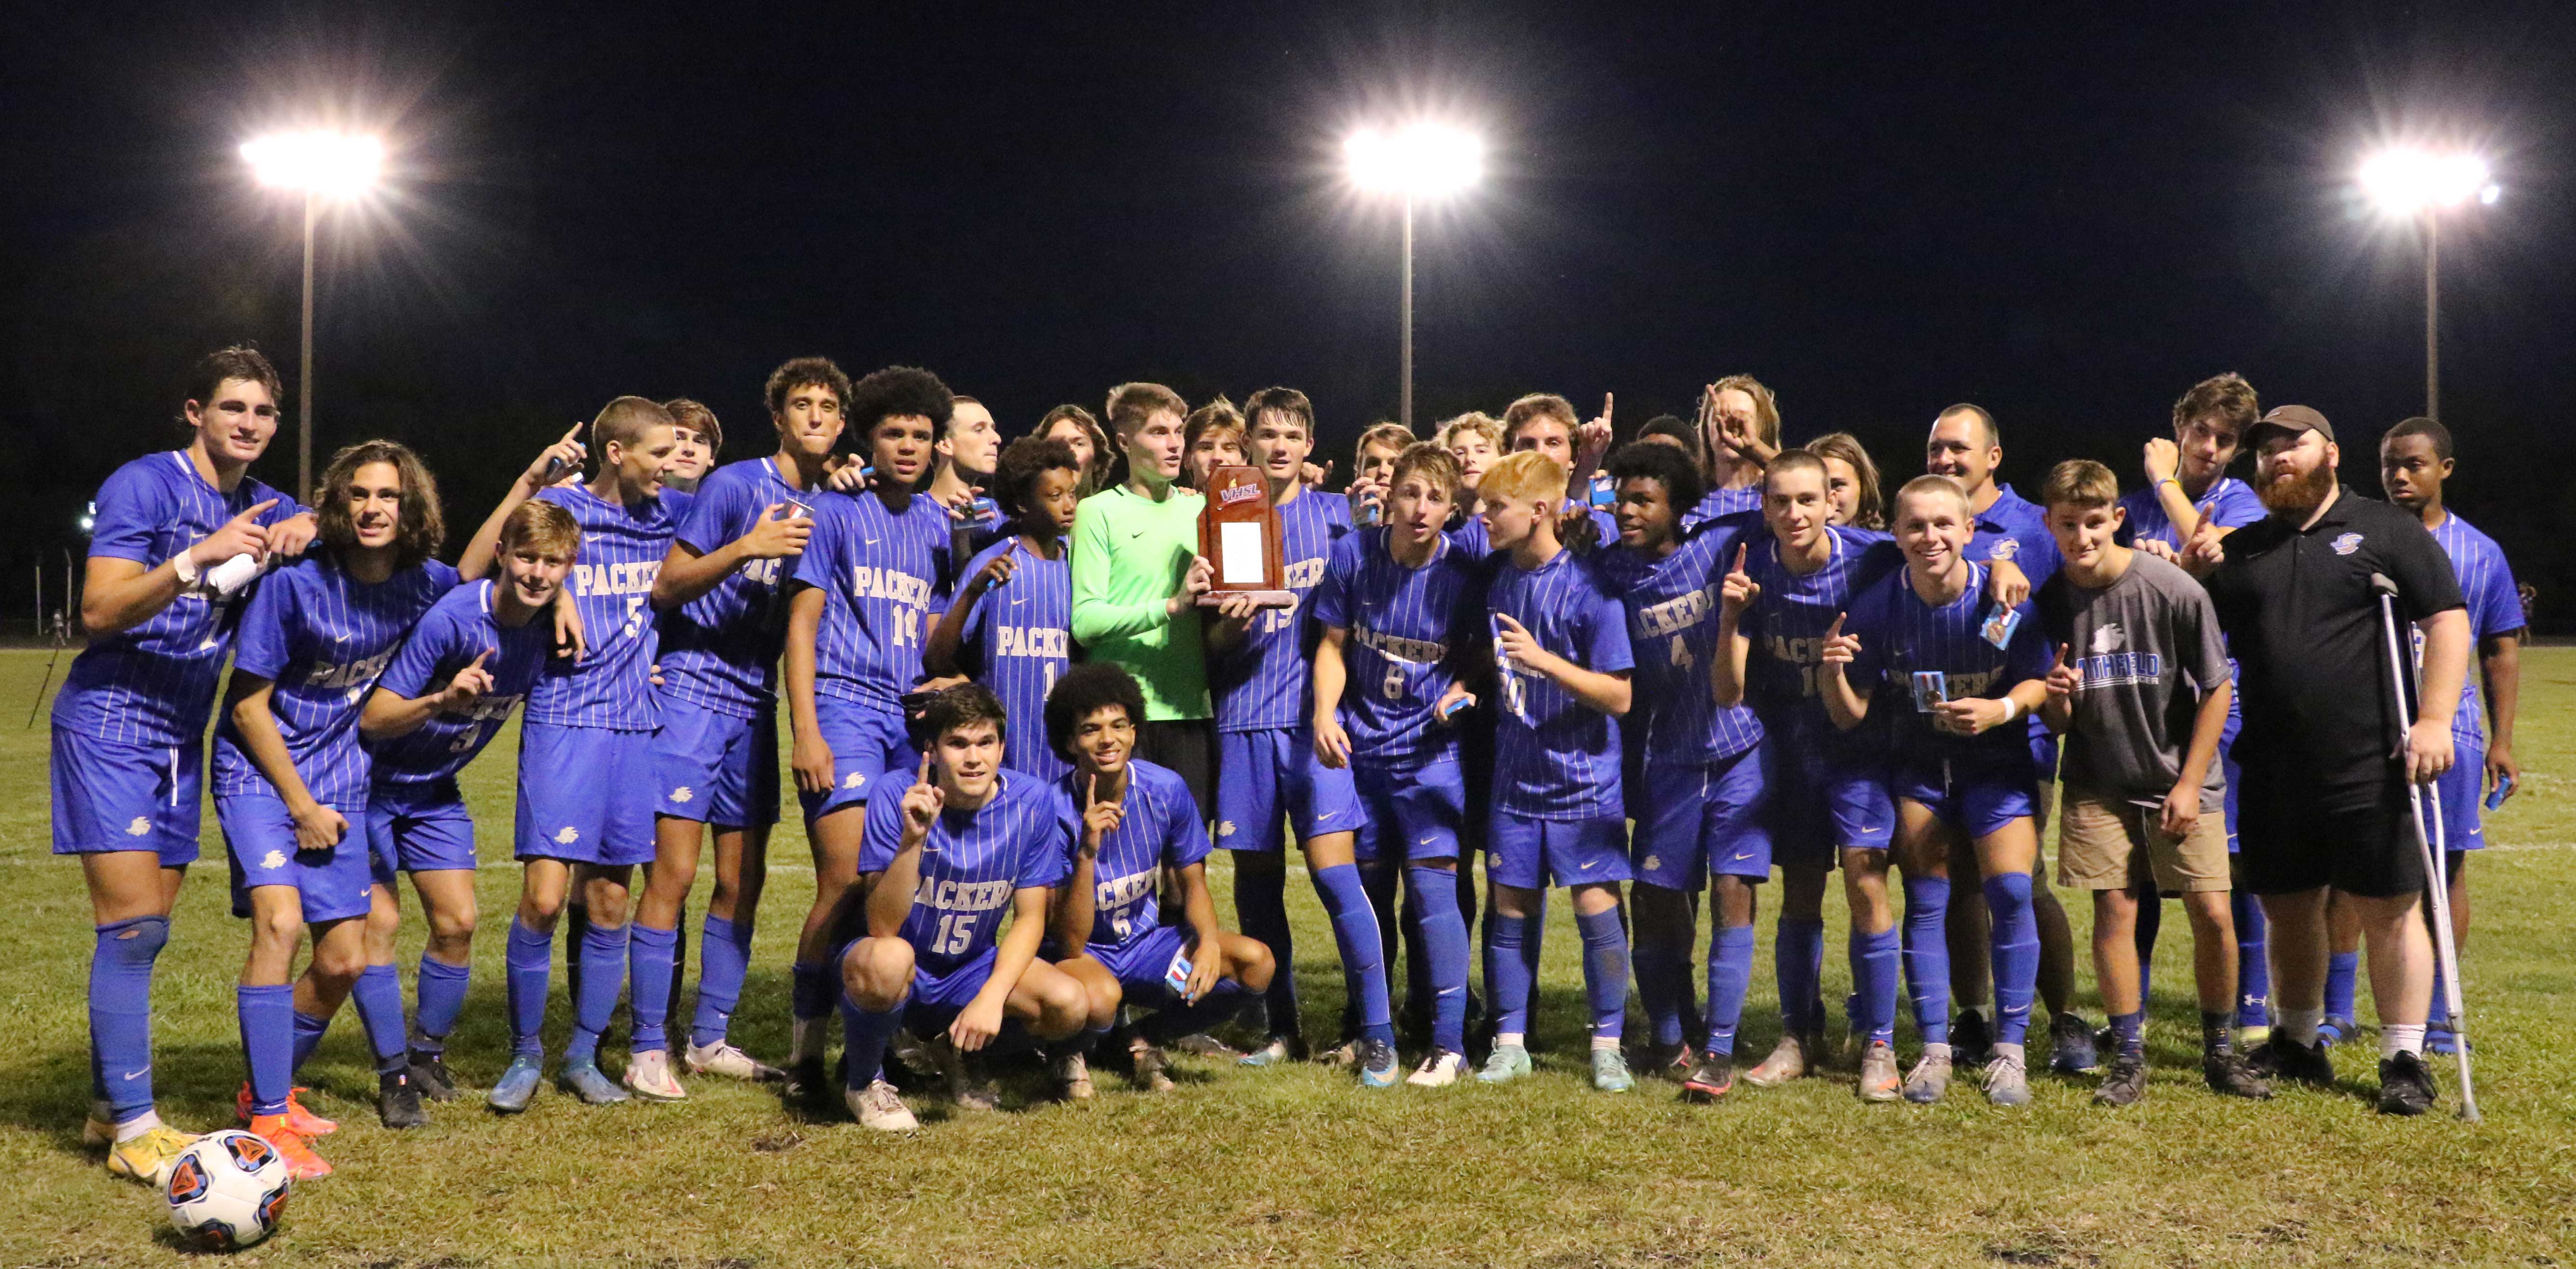 smithfield-boys-soccer-wins-first-ever-state-title-to-cap-perfect-season-smithfield-times